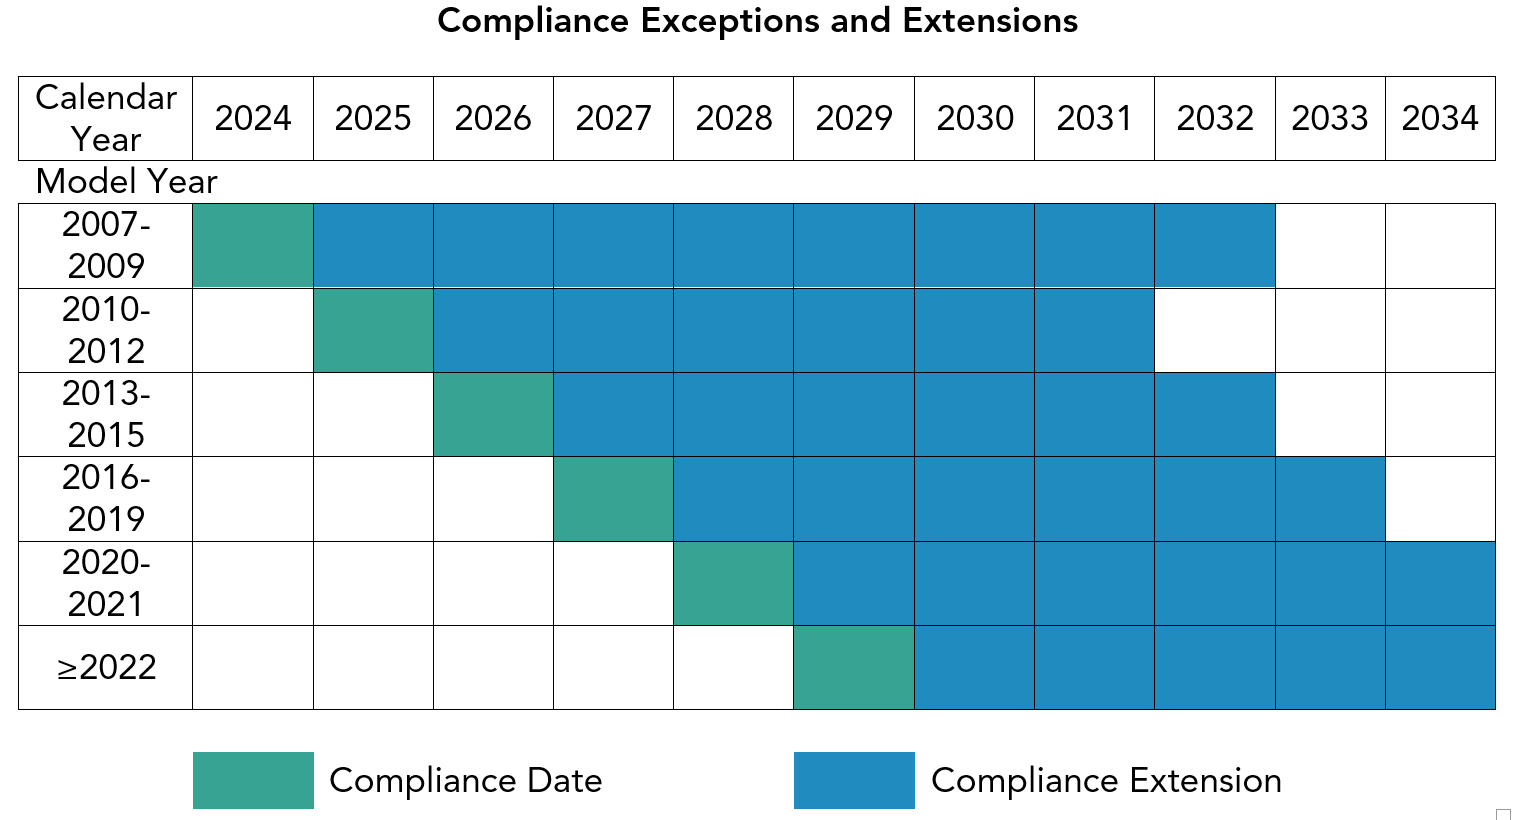 Compliance Exemptions and Extensions